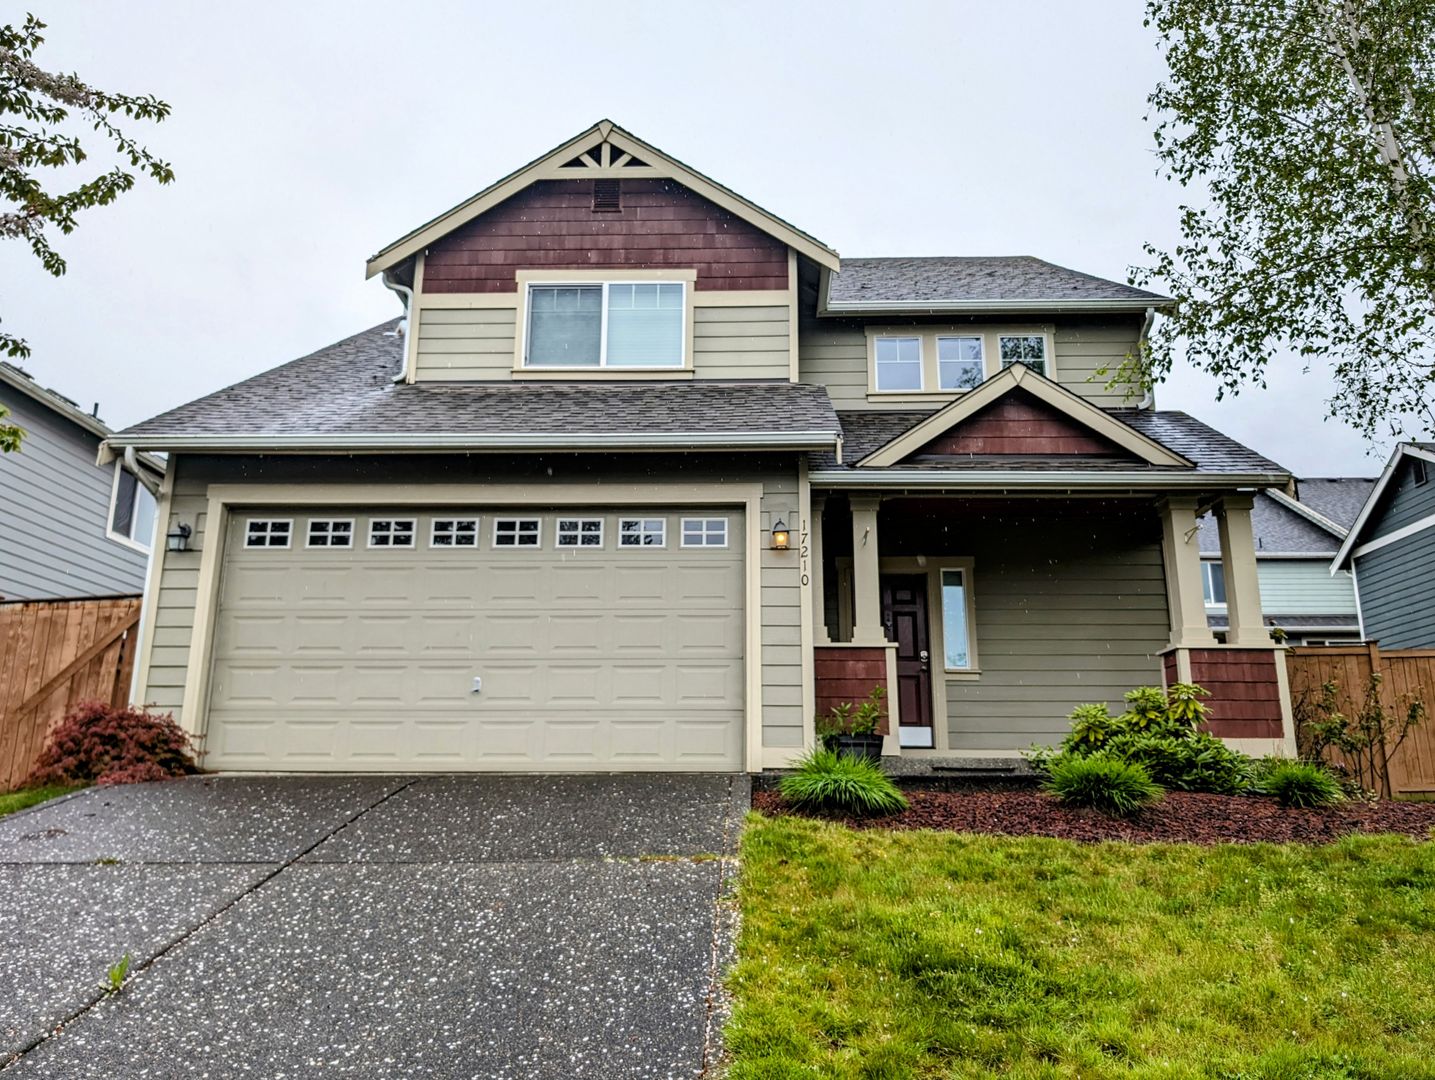 Luxury Puyallup 3 Bedroom with Peekaboo Mountain Views! Available Now!